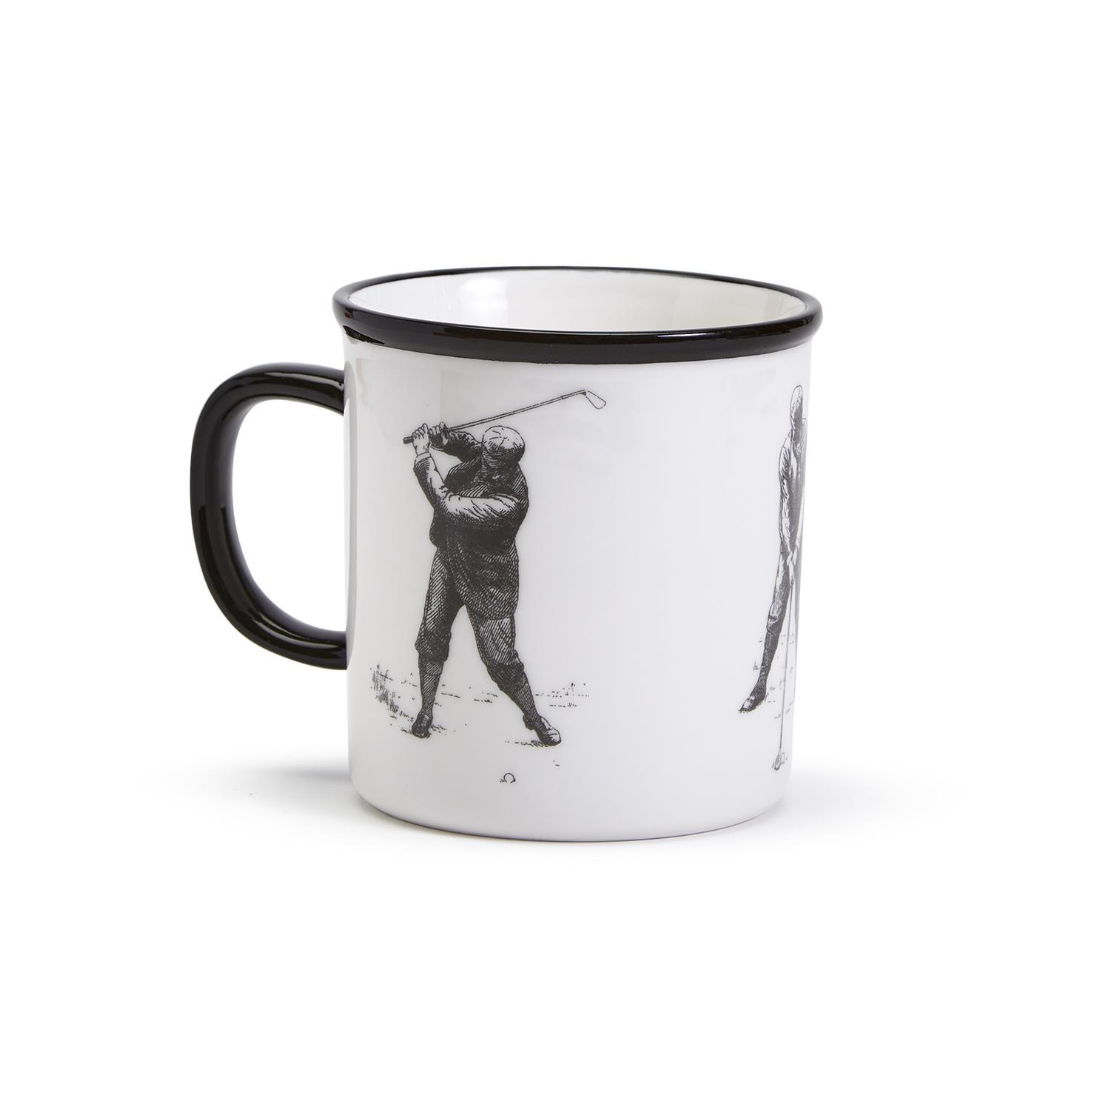 Hole-In-One Mug and Pair of Socks Set